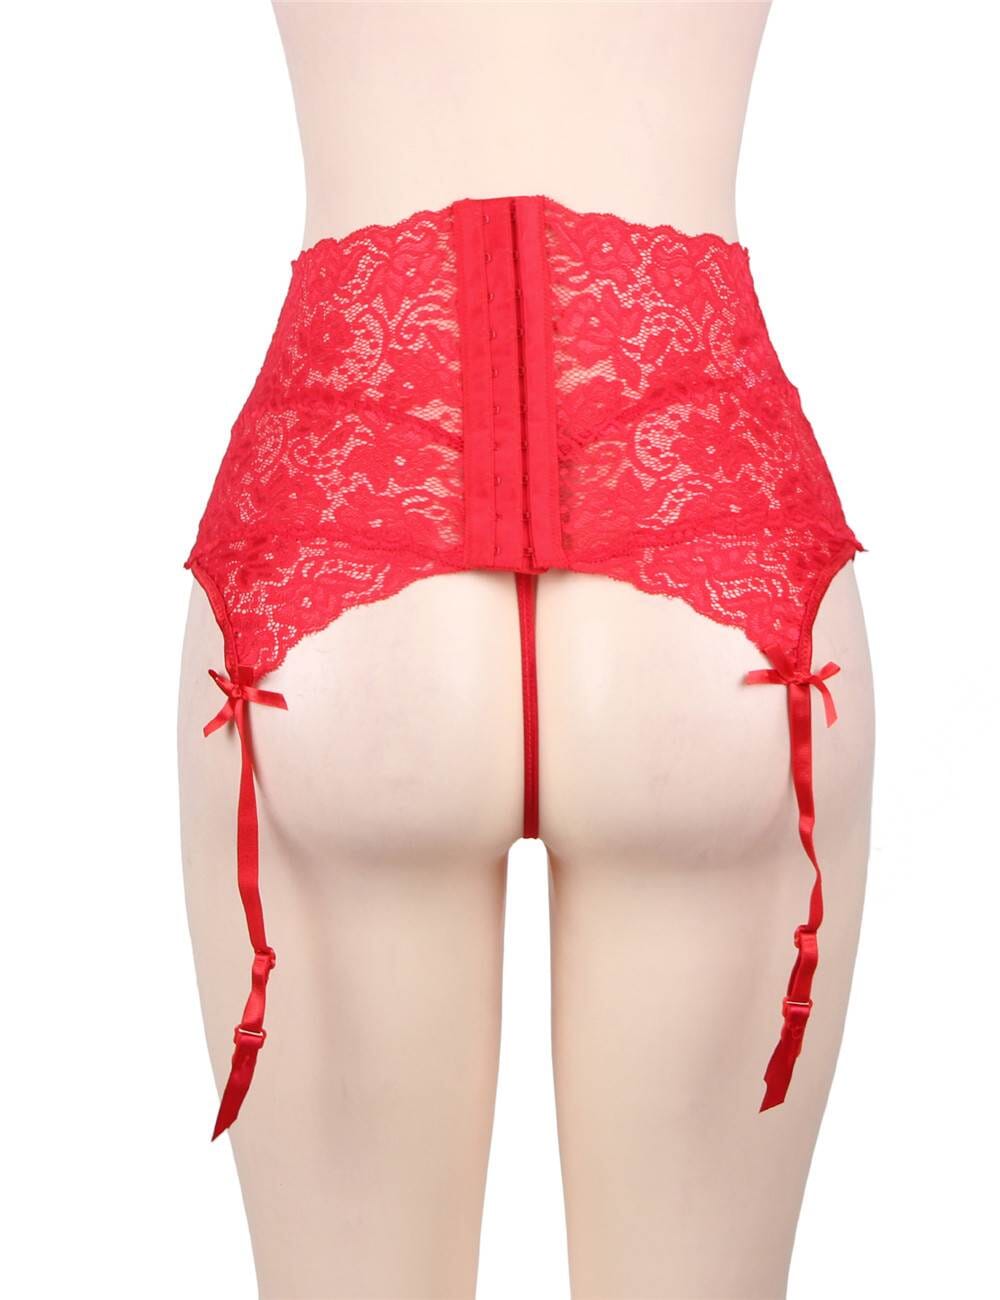 a woman wearing a red panties with a red lace garter